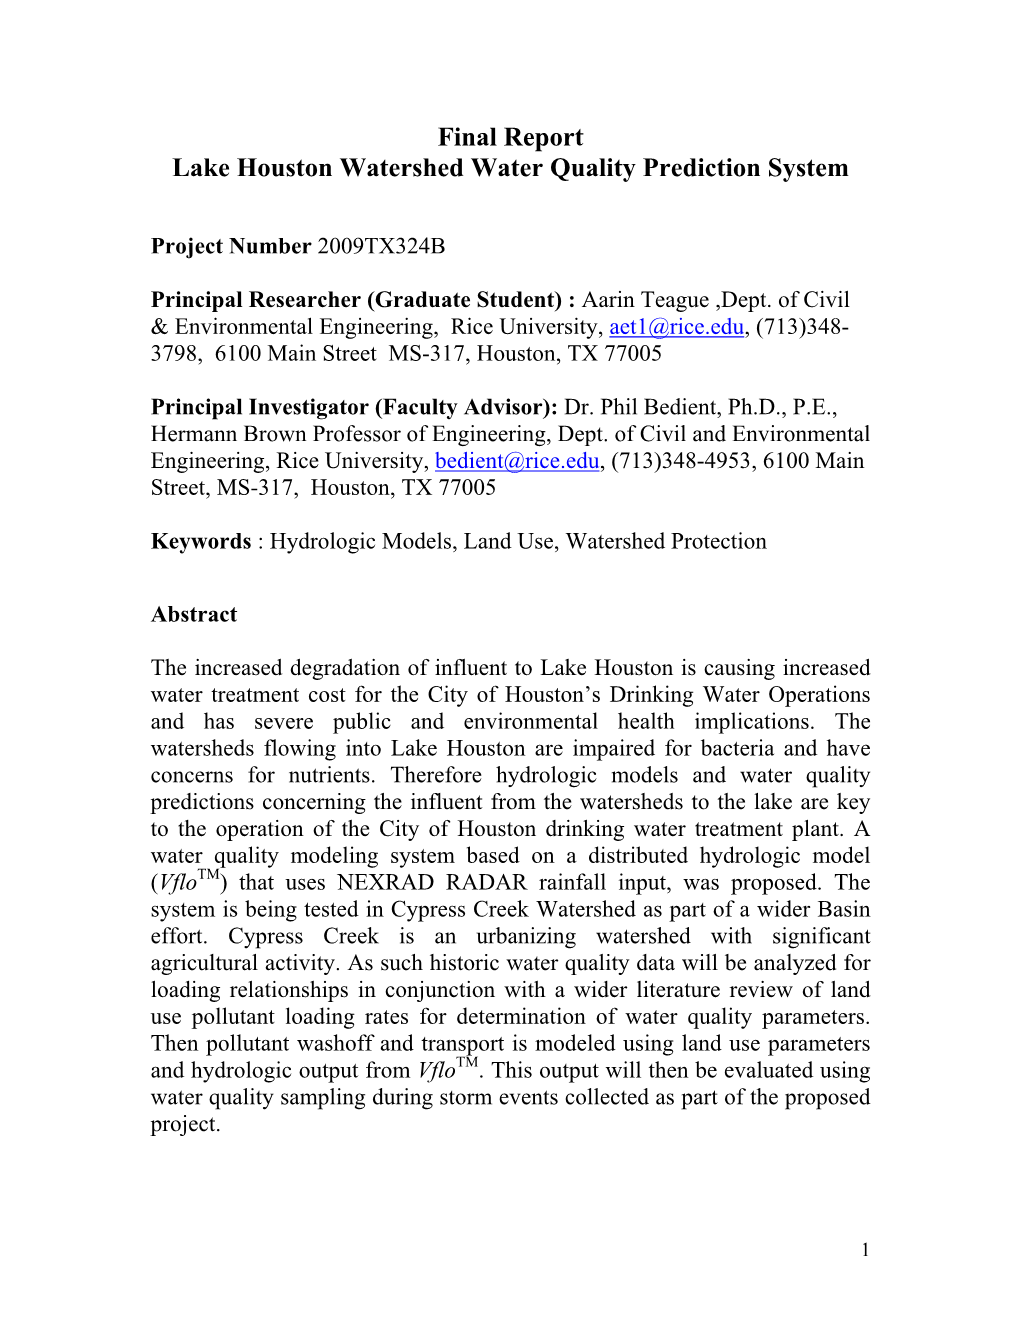 Final Report Lake Houston Watershed Water Quality Prediction System